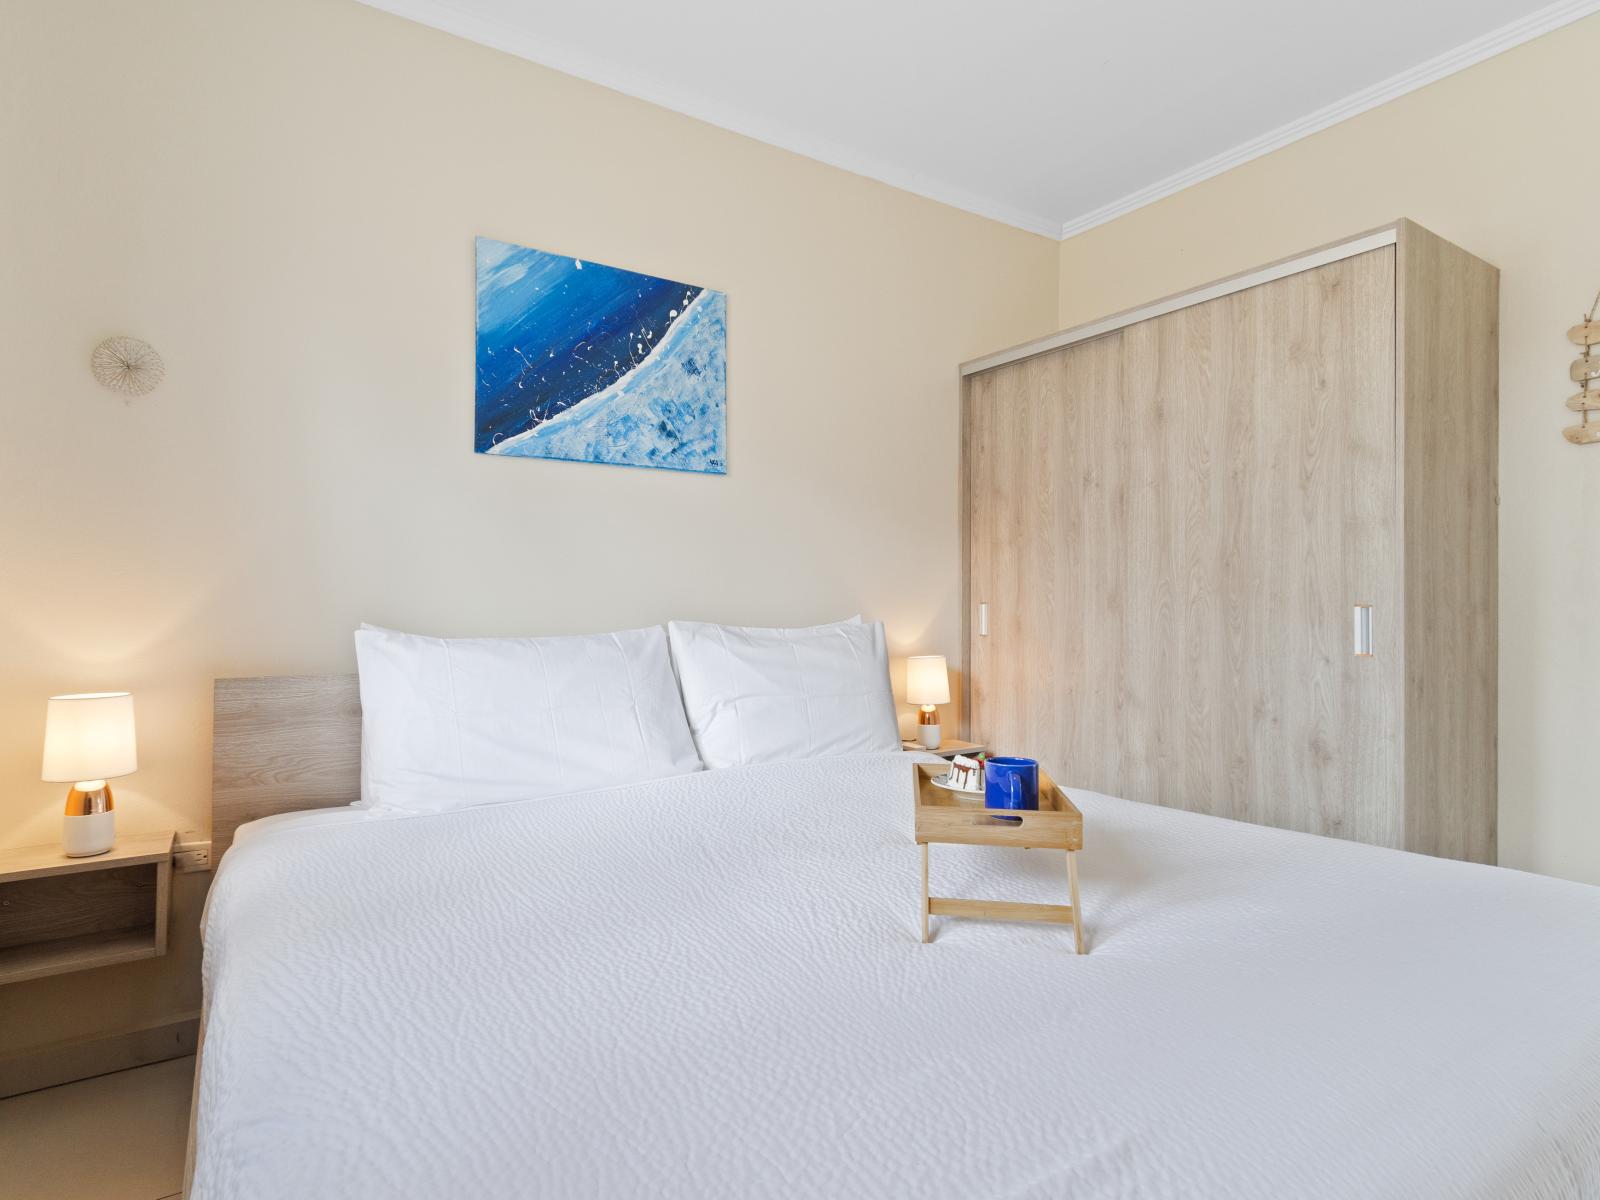 Exclusive bedroom of the apartment in Noord, Aruba - Comfy king size bed - Elegantly designed room beautifully decored with large aesthetic wall paintings - Majestic table lamps - Neat and clean linen with soft pillows - Large size stand mirror